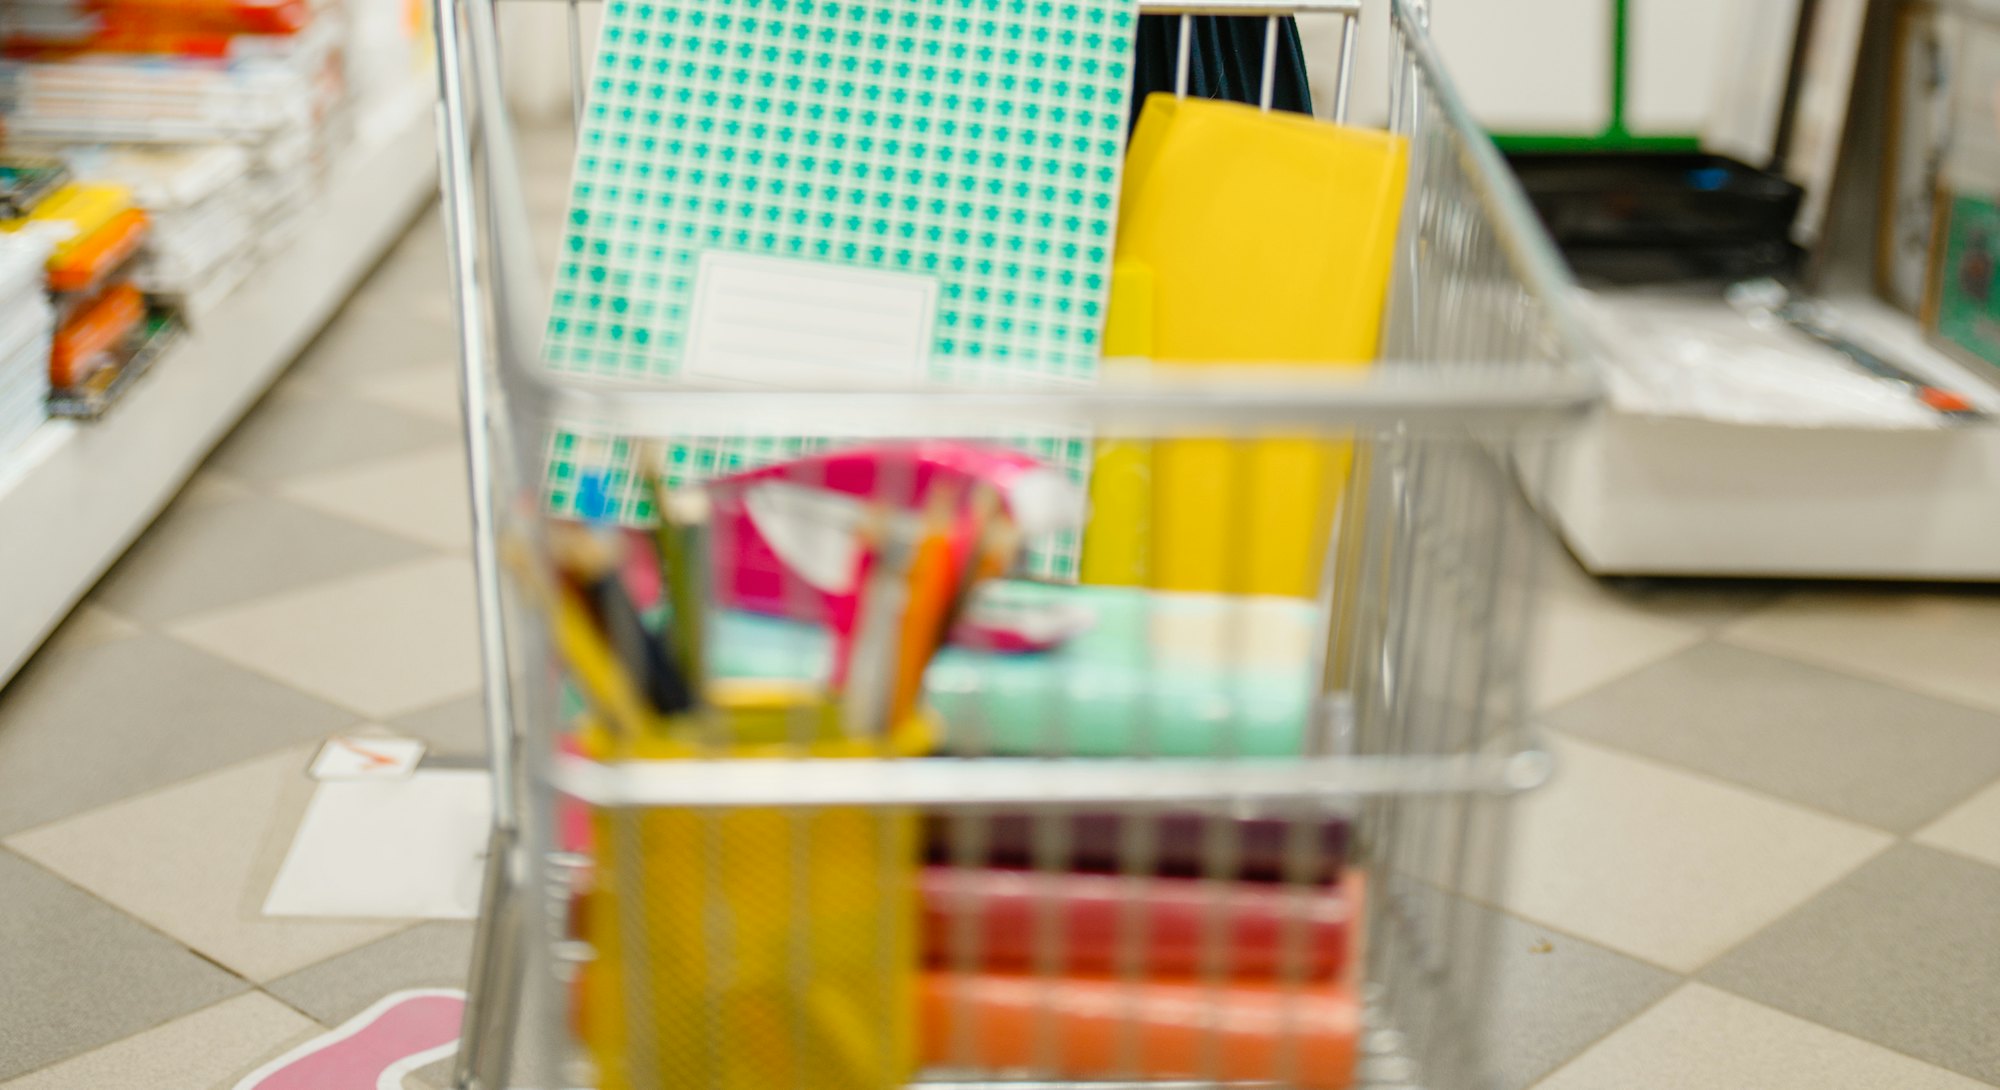 A young girl puts a folder in a shopping cart during back to school sales.